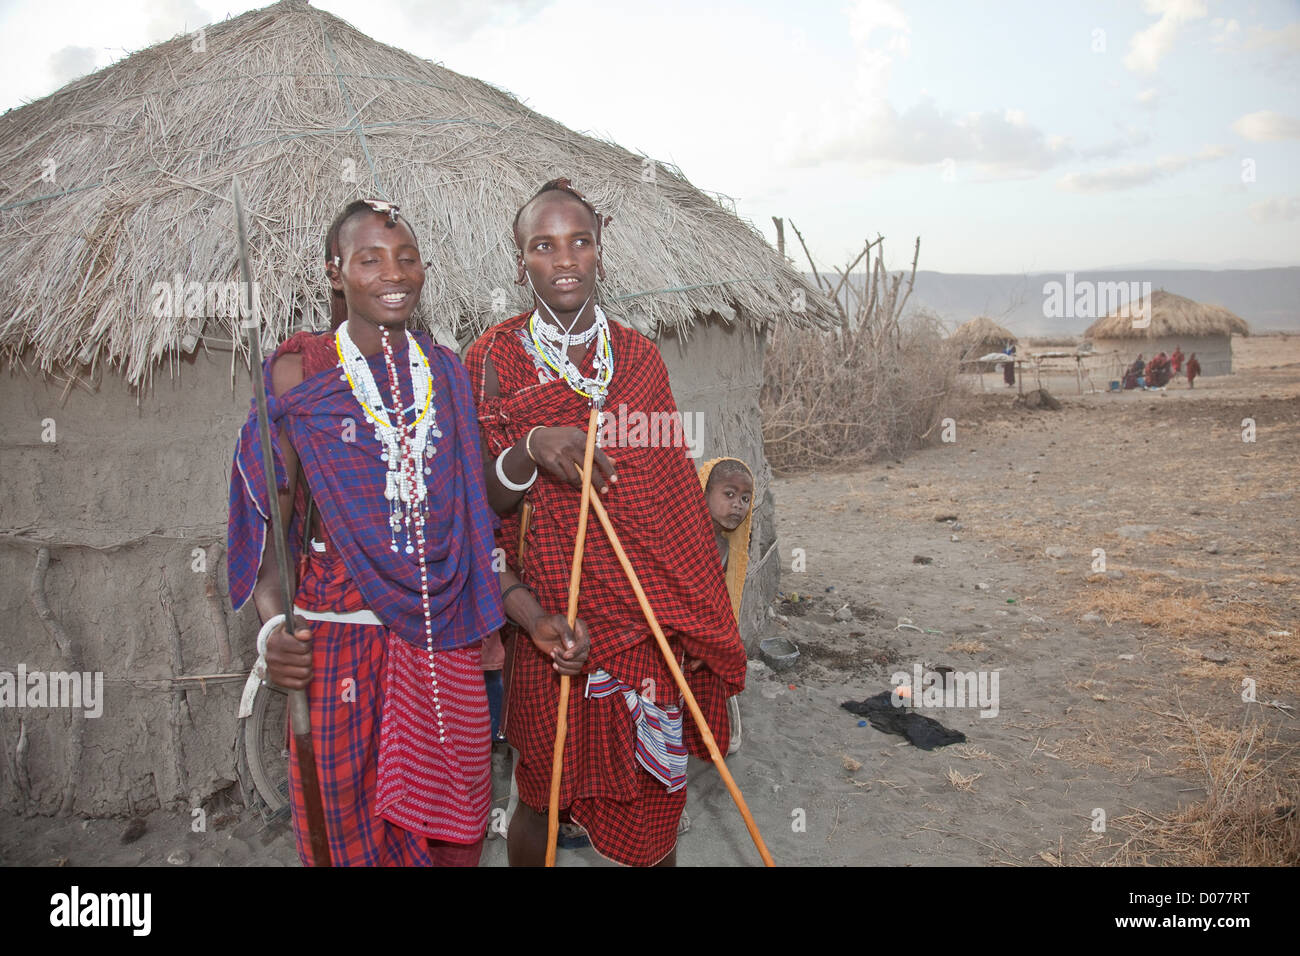 Two Maasai men-worriers at Tanzania;East Africa;Africa;Authentic Cultural Village in Olpopongi;Maasai Stock Photo